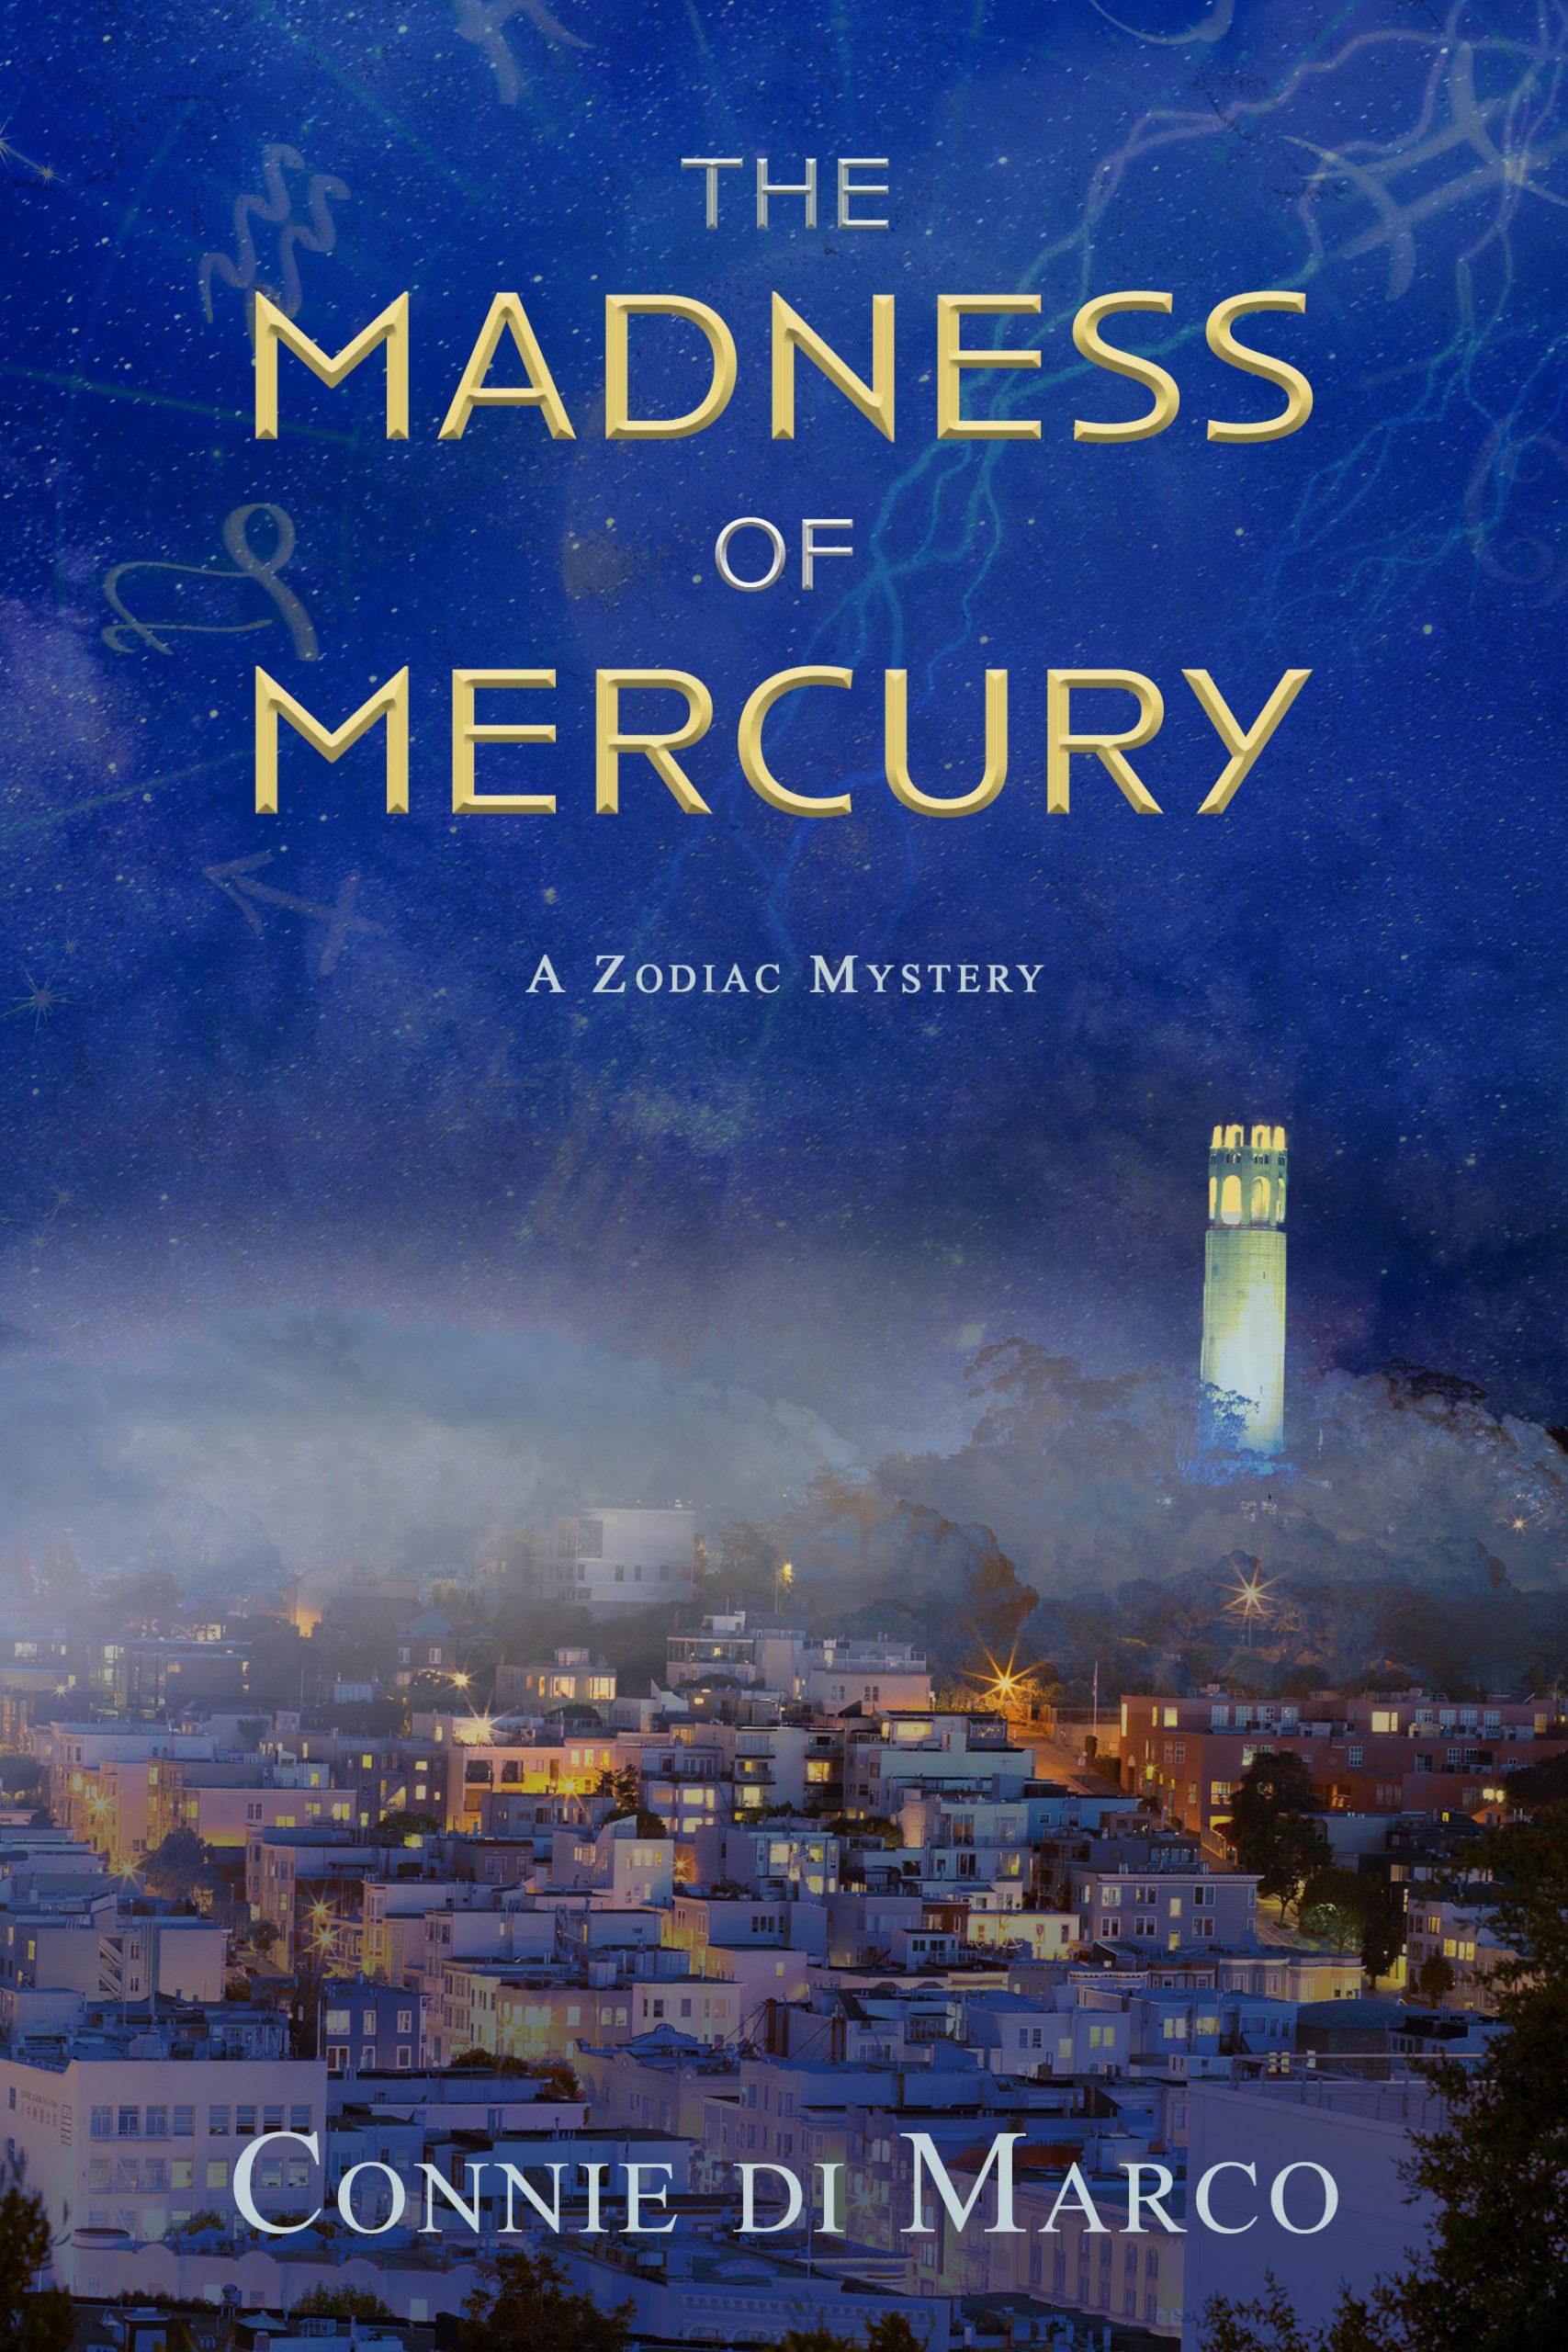 The Madness of Mercury by Connie di Marco